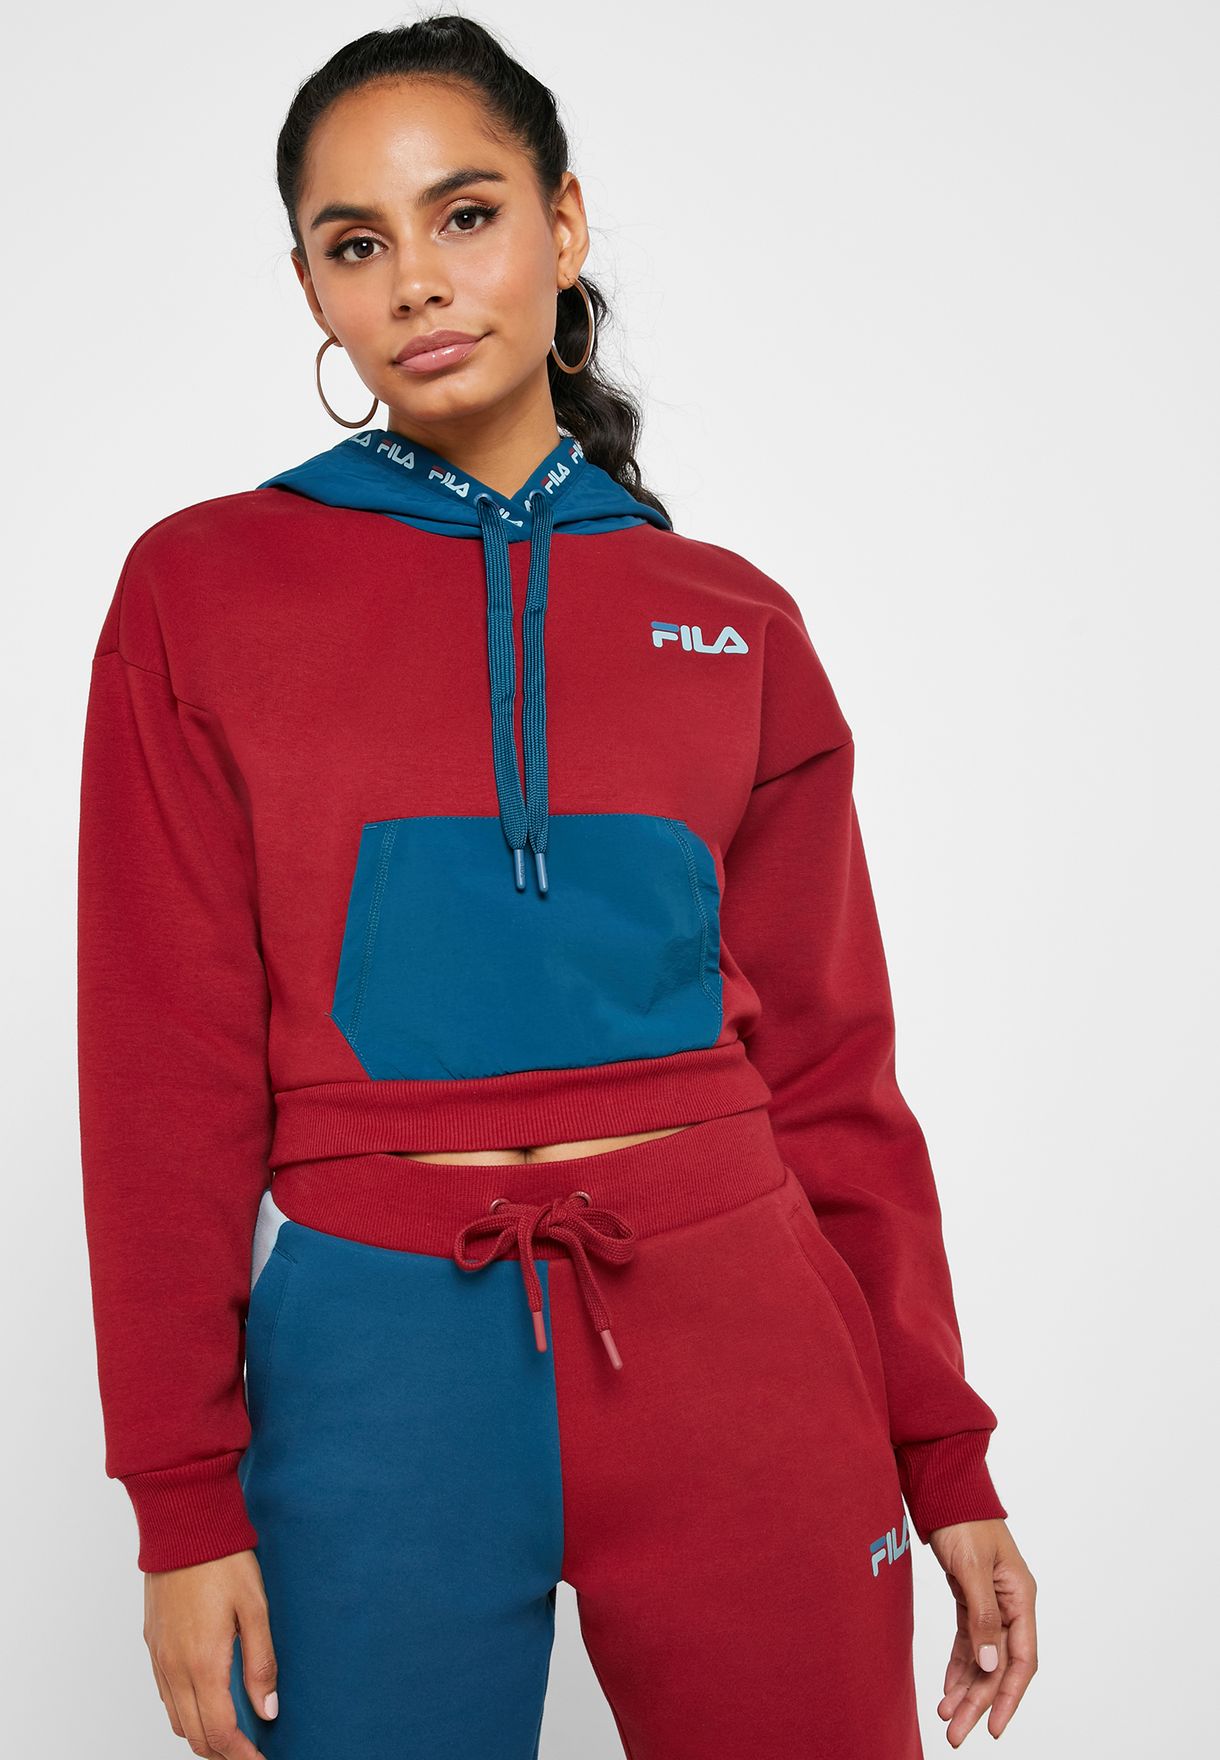 fila red and blue hoodie